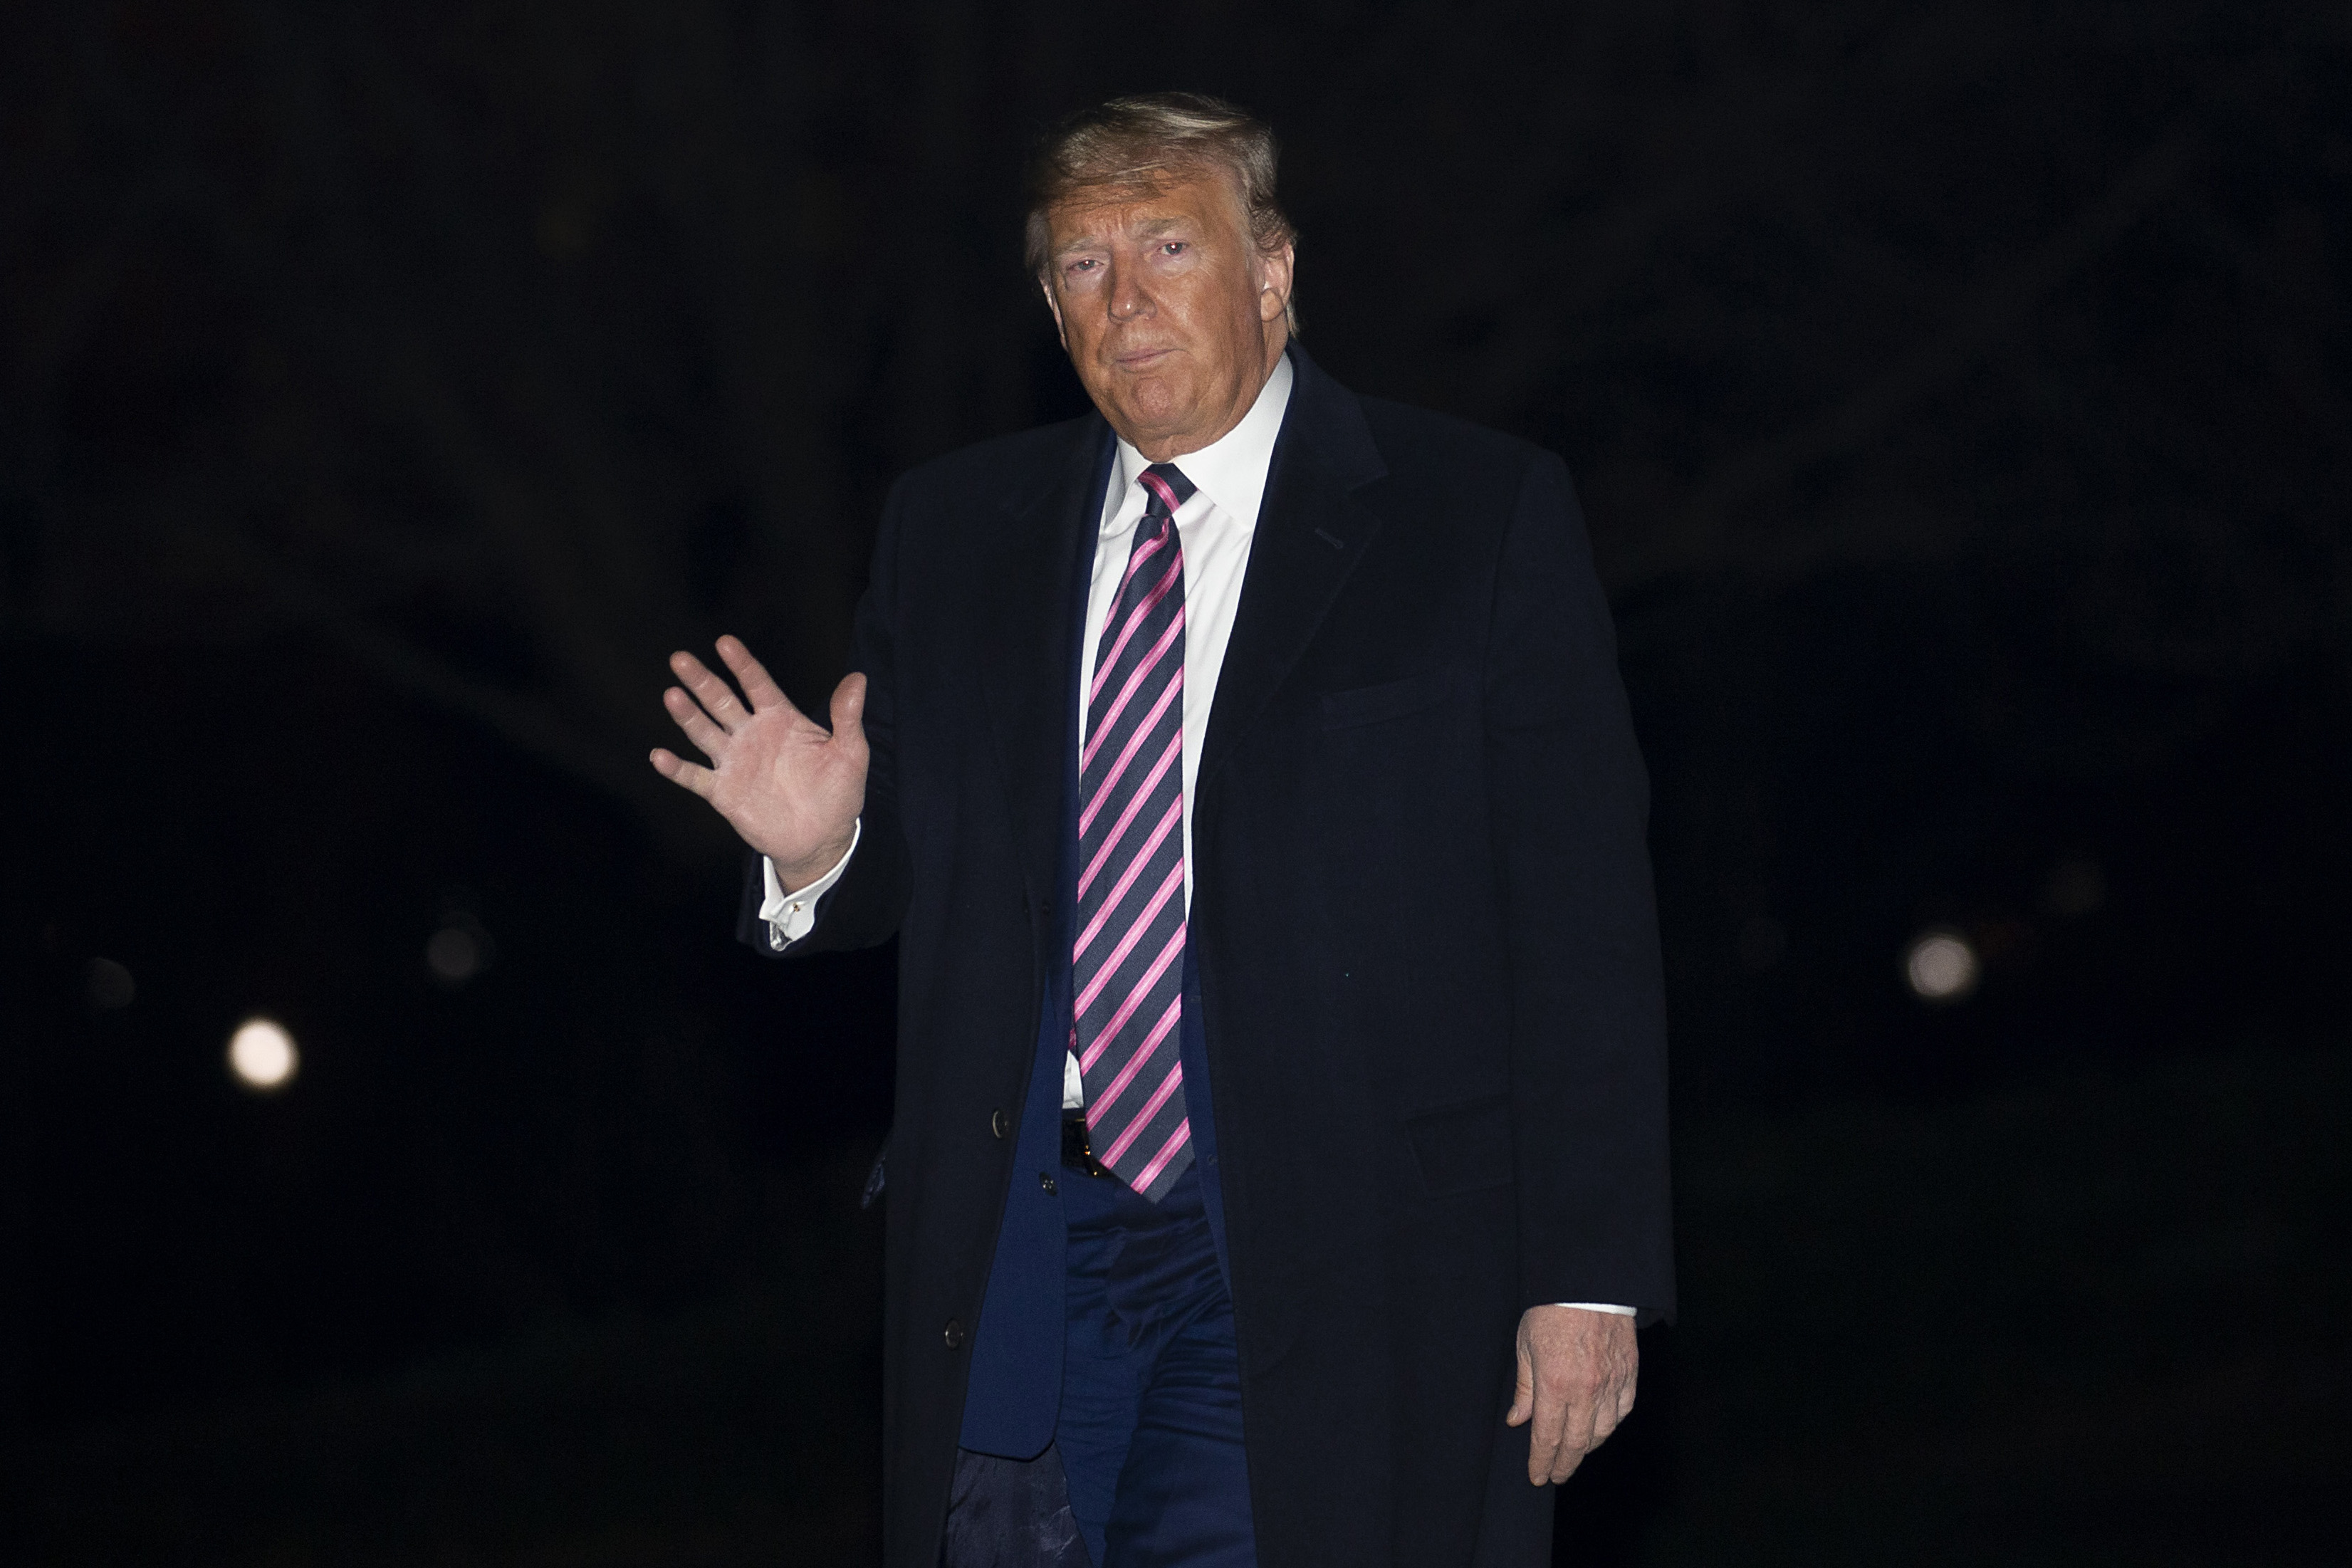 WASHINGTON, DC - FEBRUARY 21: U.S. President Donald Trump walks on the South Lawn while returning to the White House following a campaign rally in Nevada on February 21, 2020 in Washington, DC. (Photo by Tasos Katopodis/Getty Images)